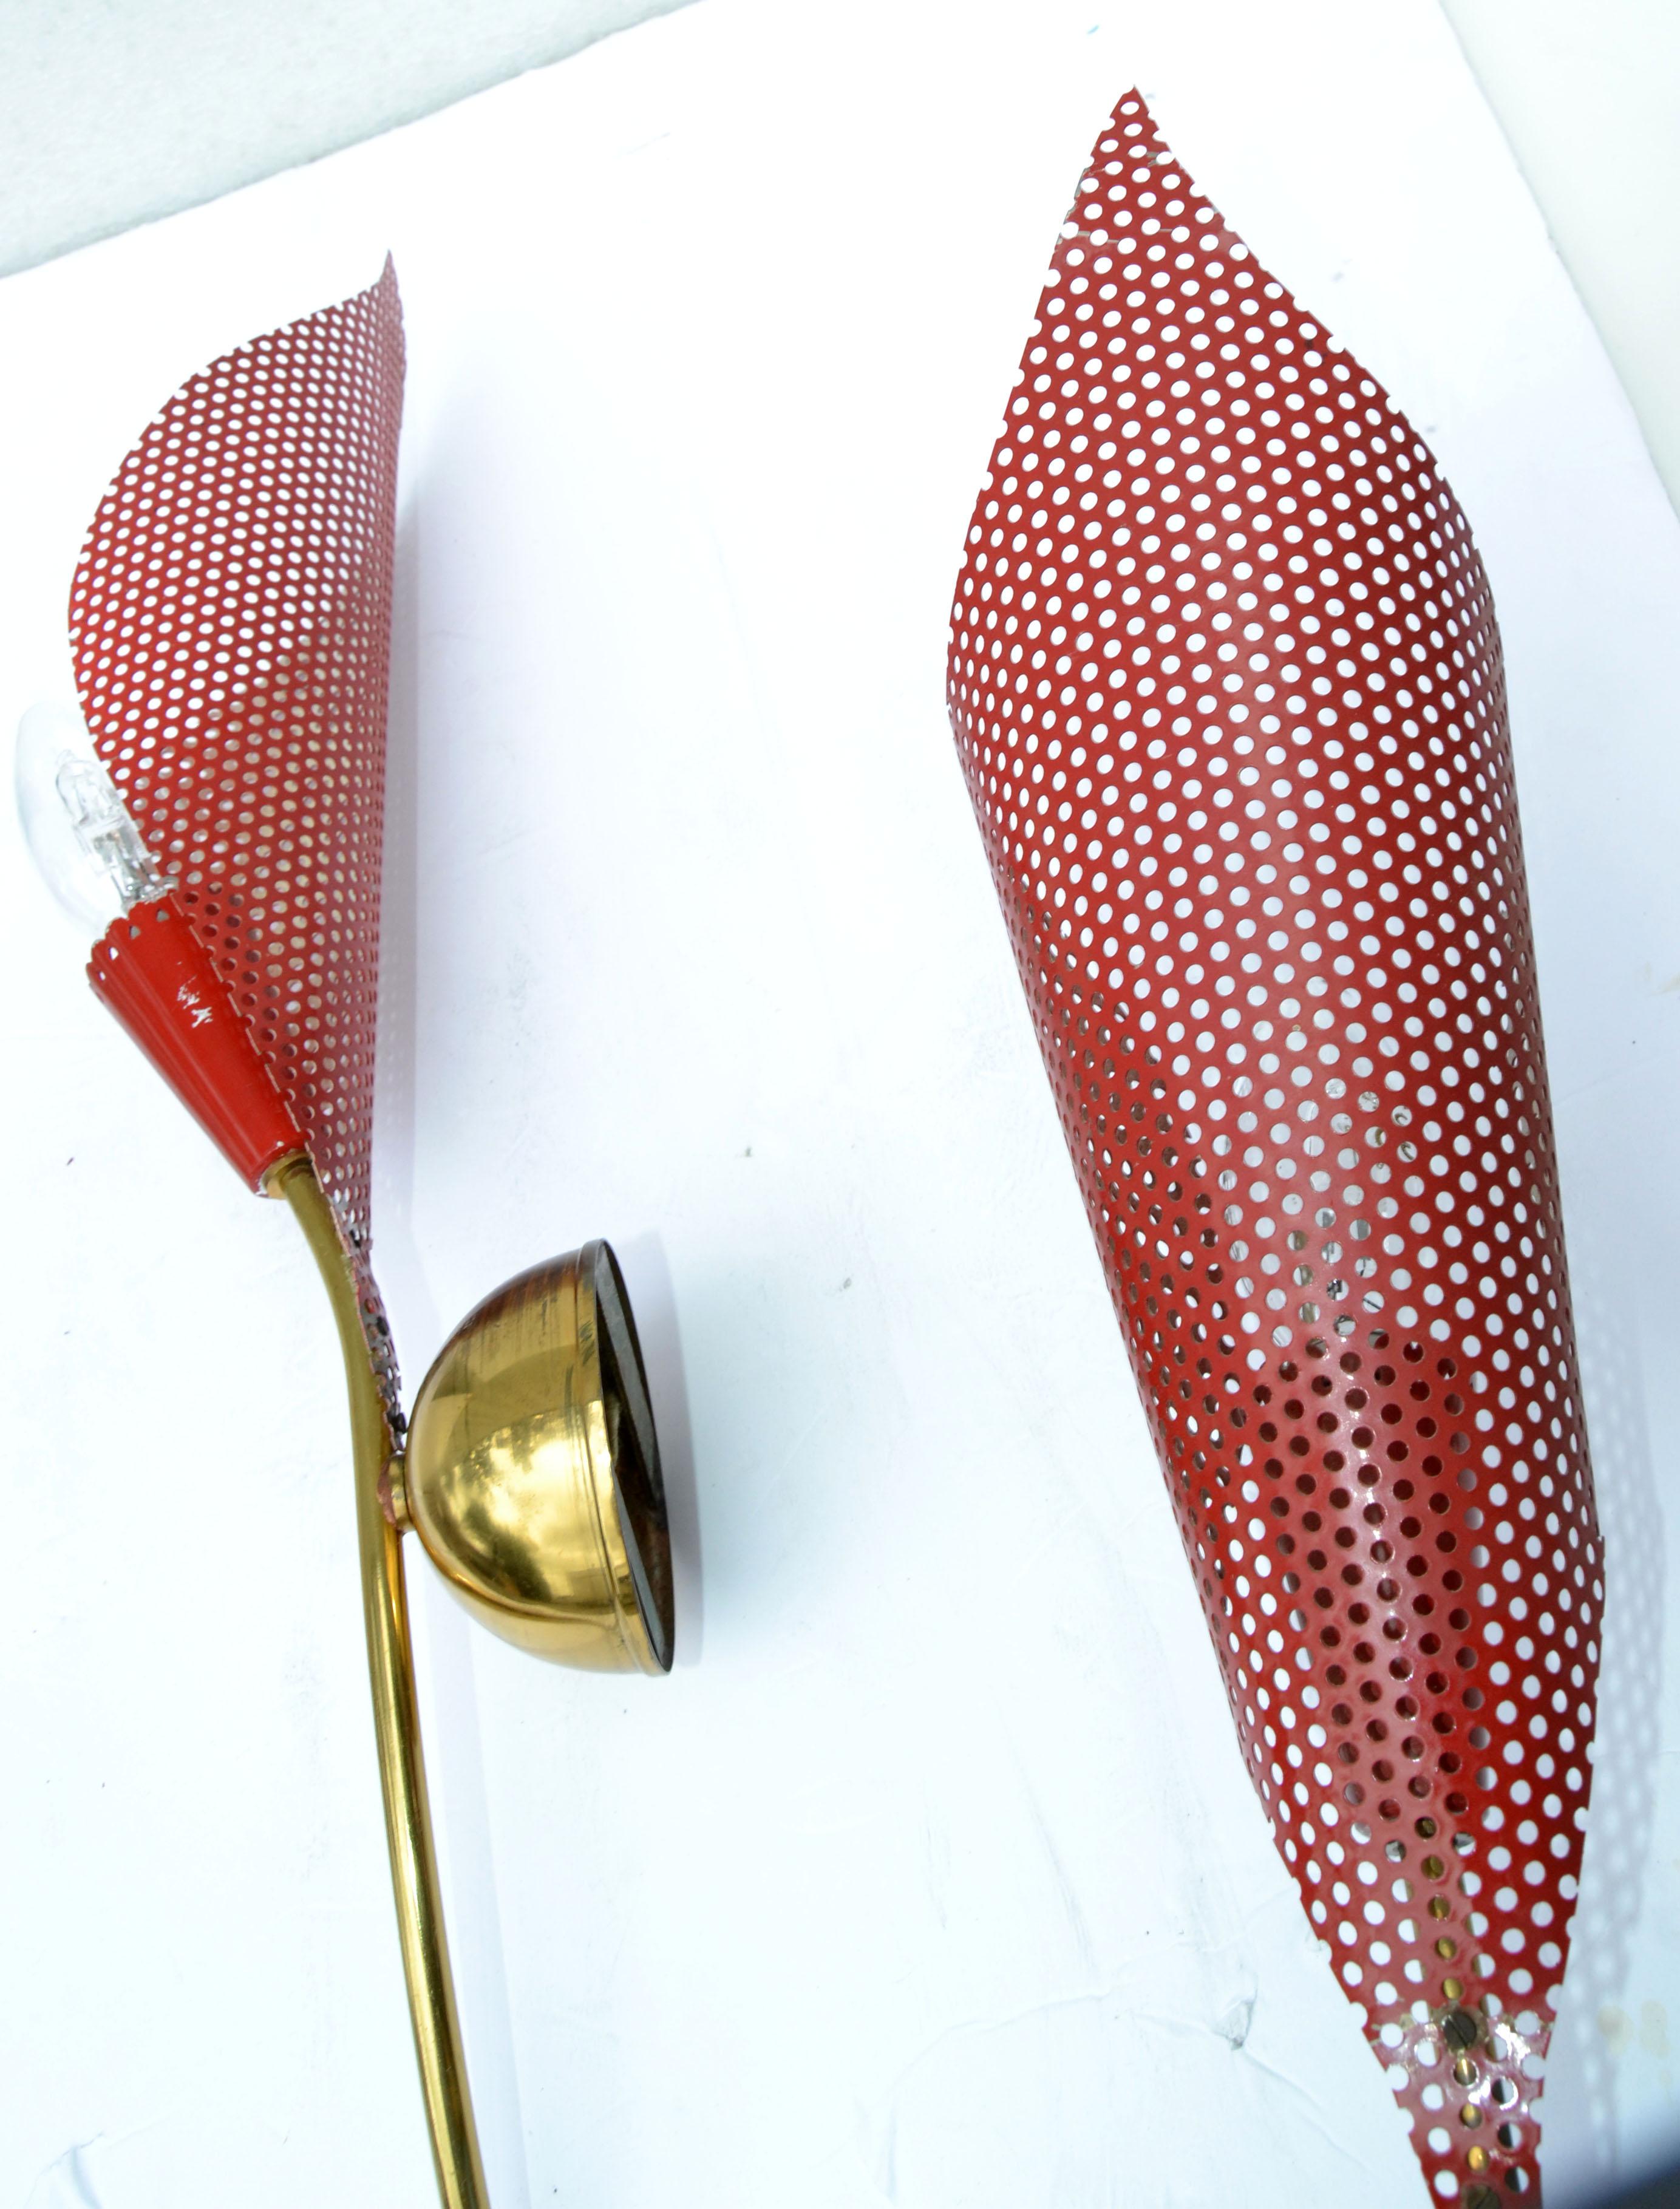 20th Century Mathieu Matégot Sconces Brass & Red Metal Mesh Shades France 60s Wall Lamps Pair For Sale